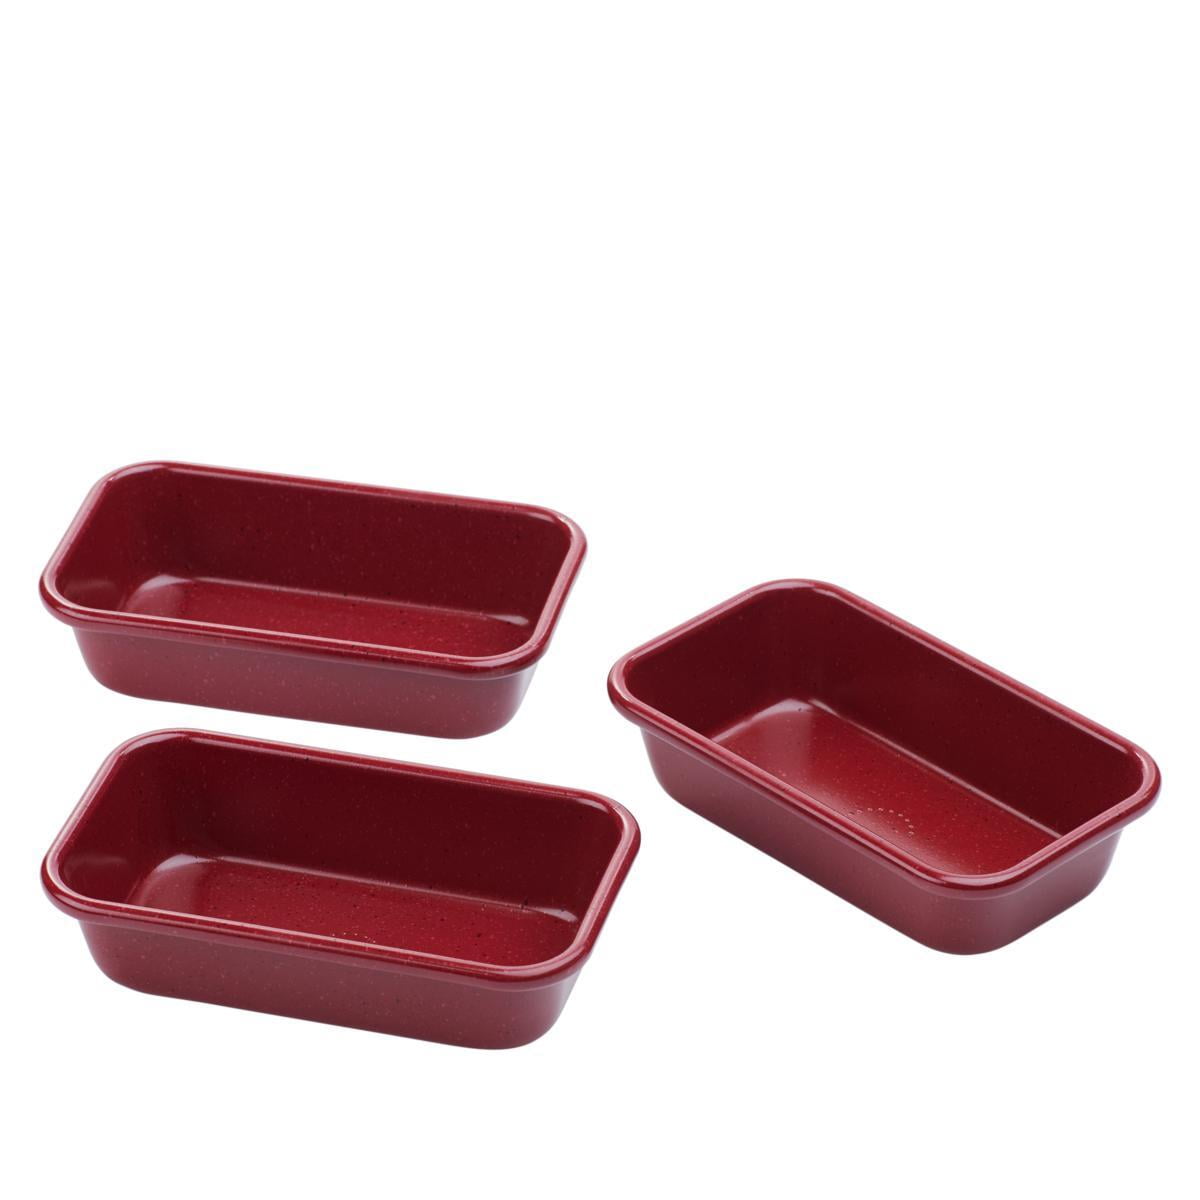 4.5 X 2.5 Inch chefgadget Set of 6 Mini Loaf Pans